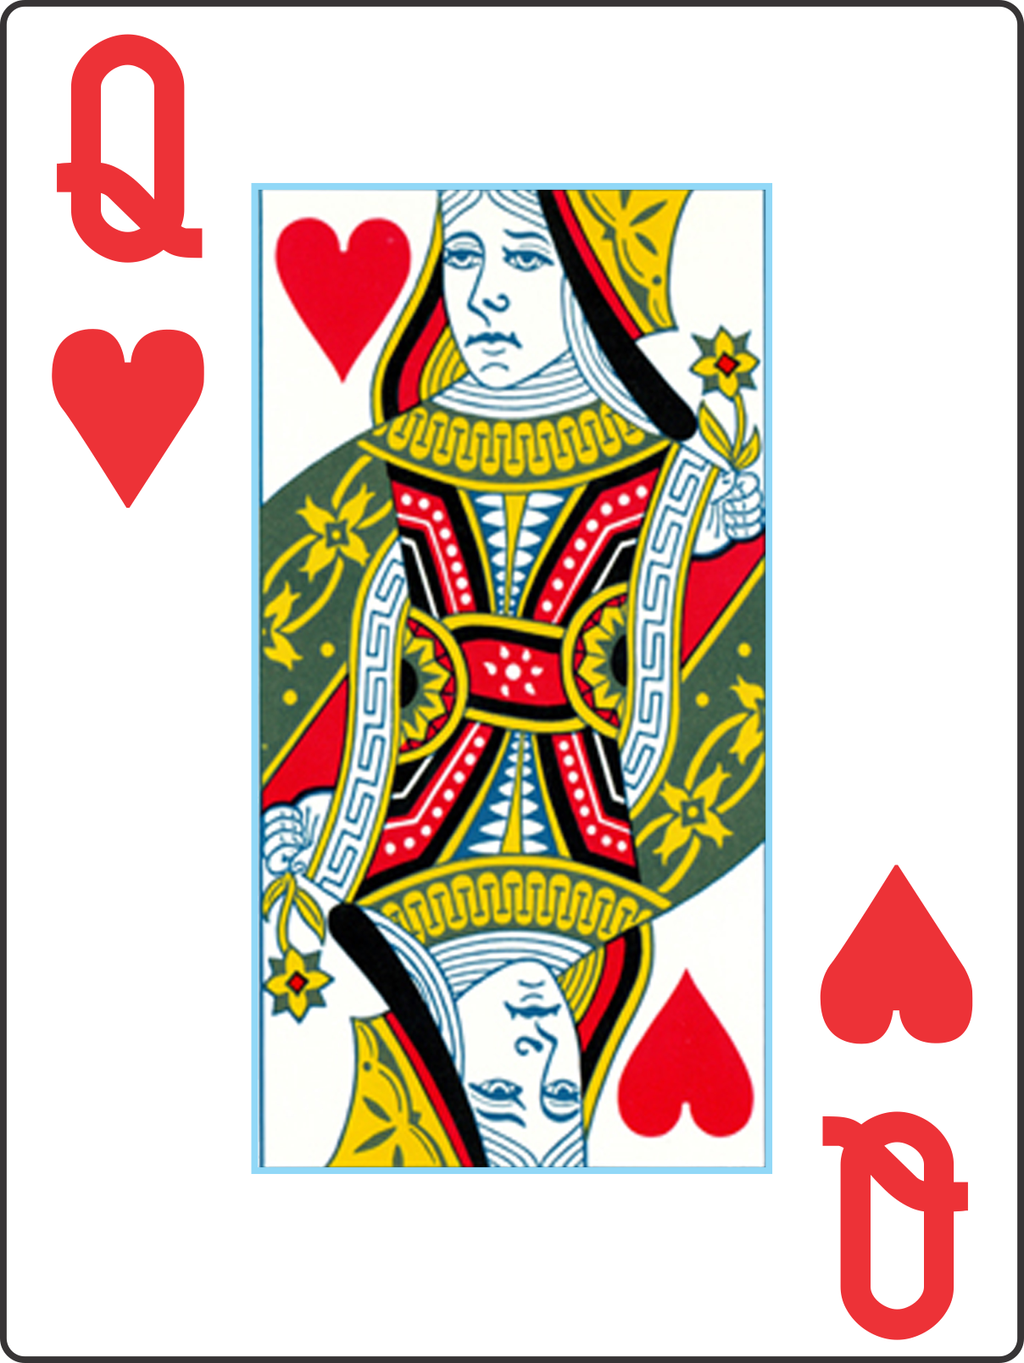 My Playing Cards V2 Queen of Hearts by Gabe0530 on DeviantArt